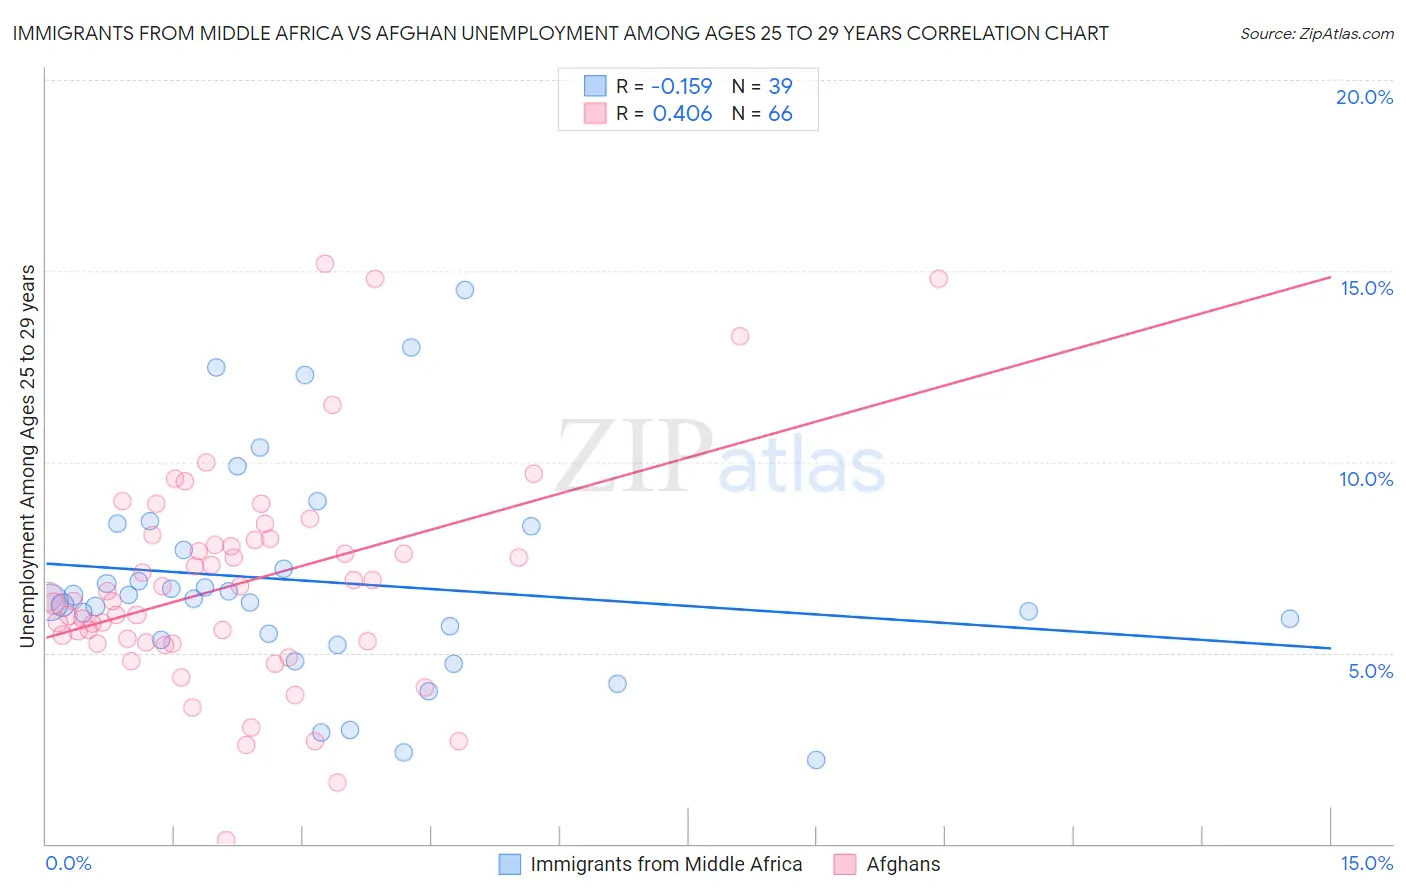 Immigrants from Middle Africa vs Afghan Unemployment Among Ages 25 to 29 years